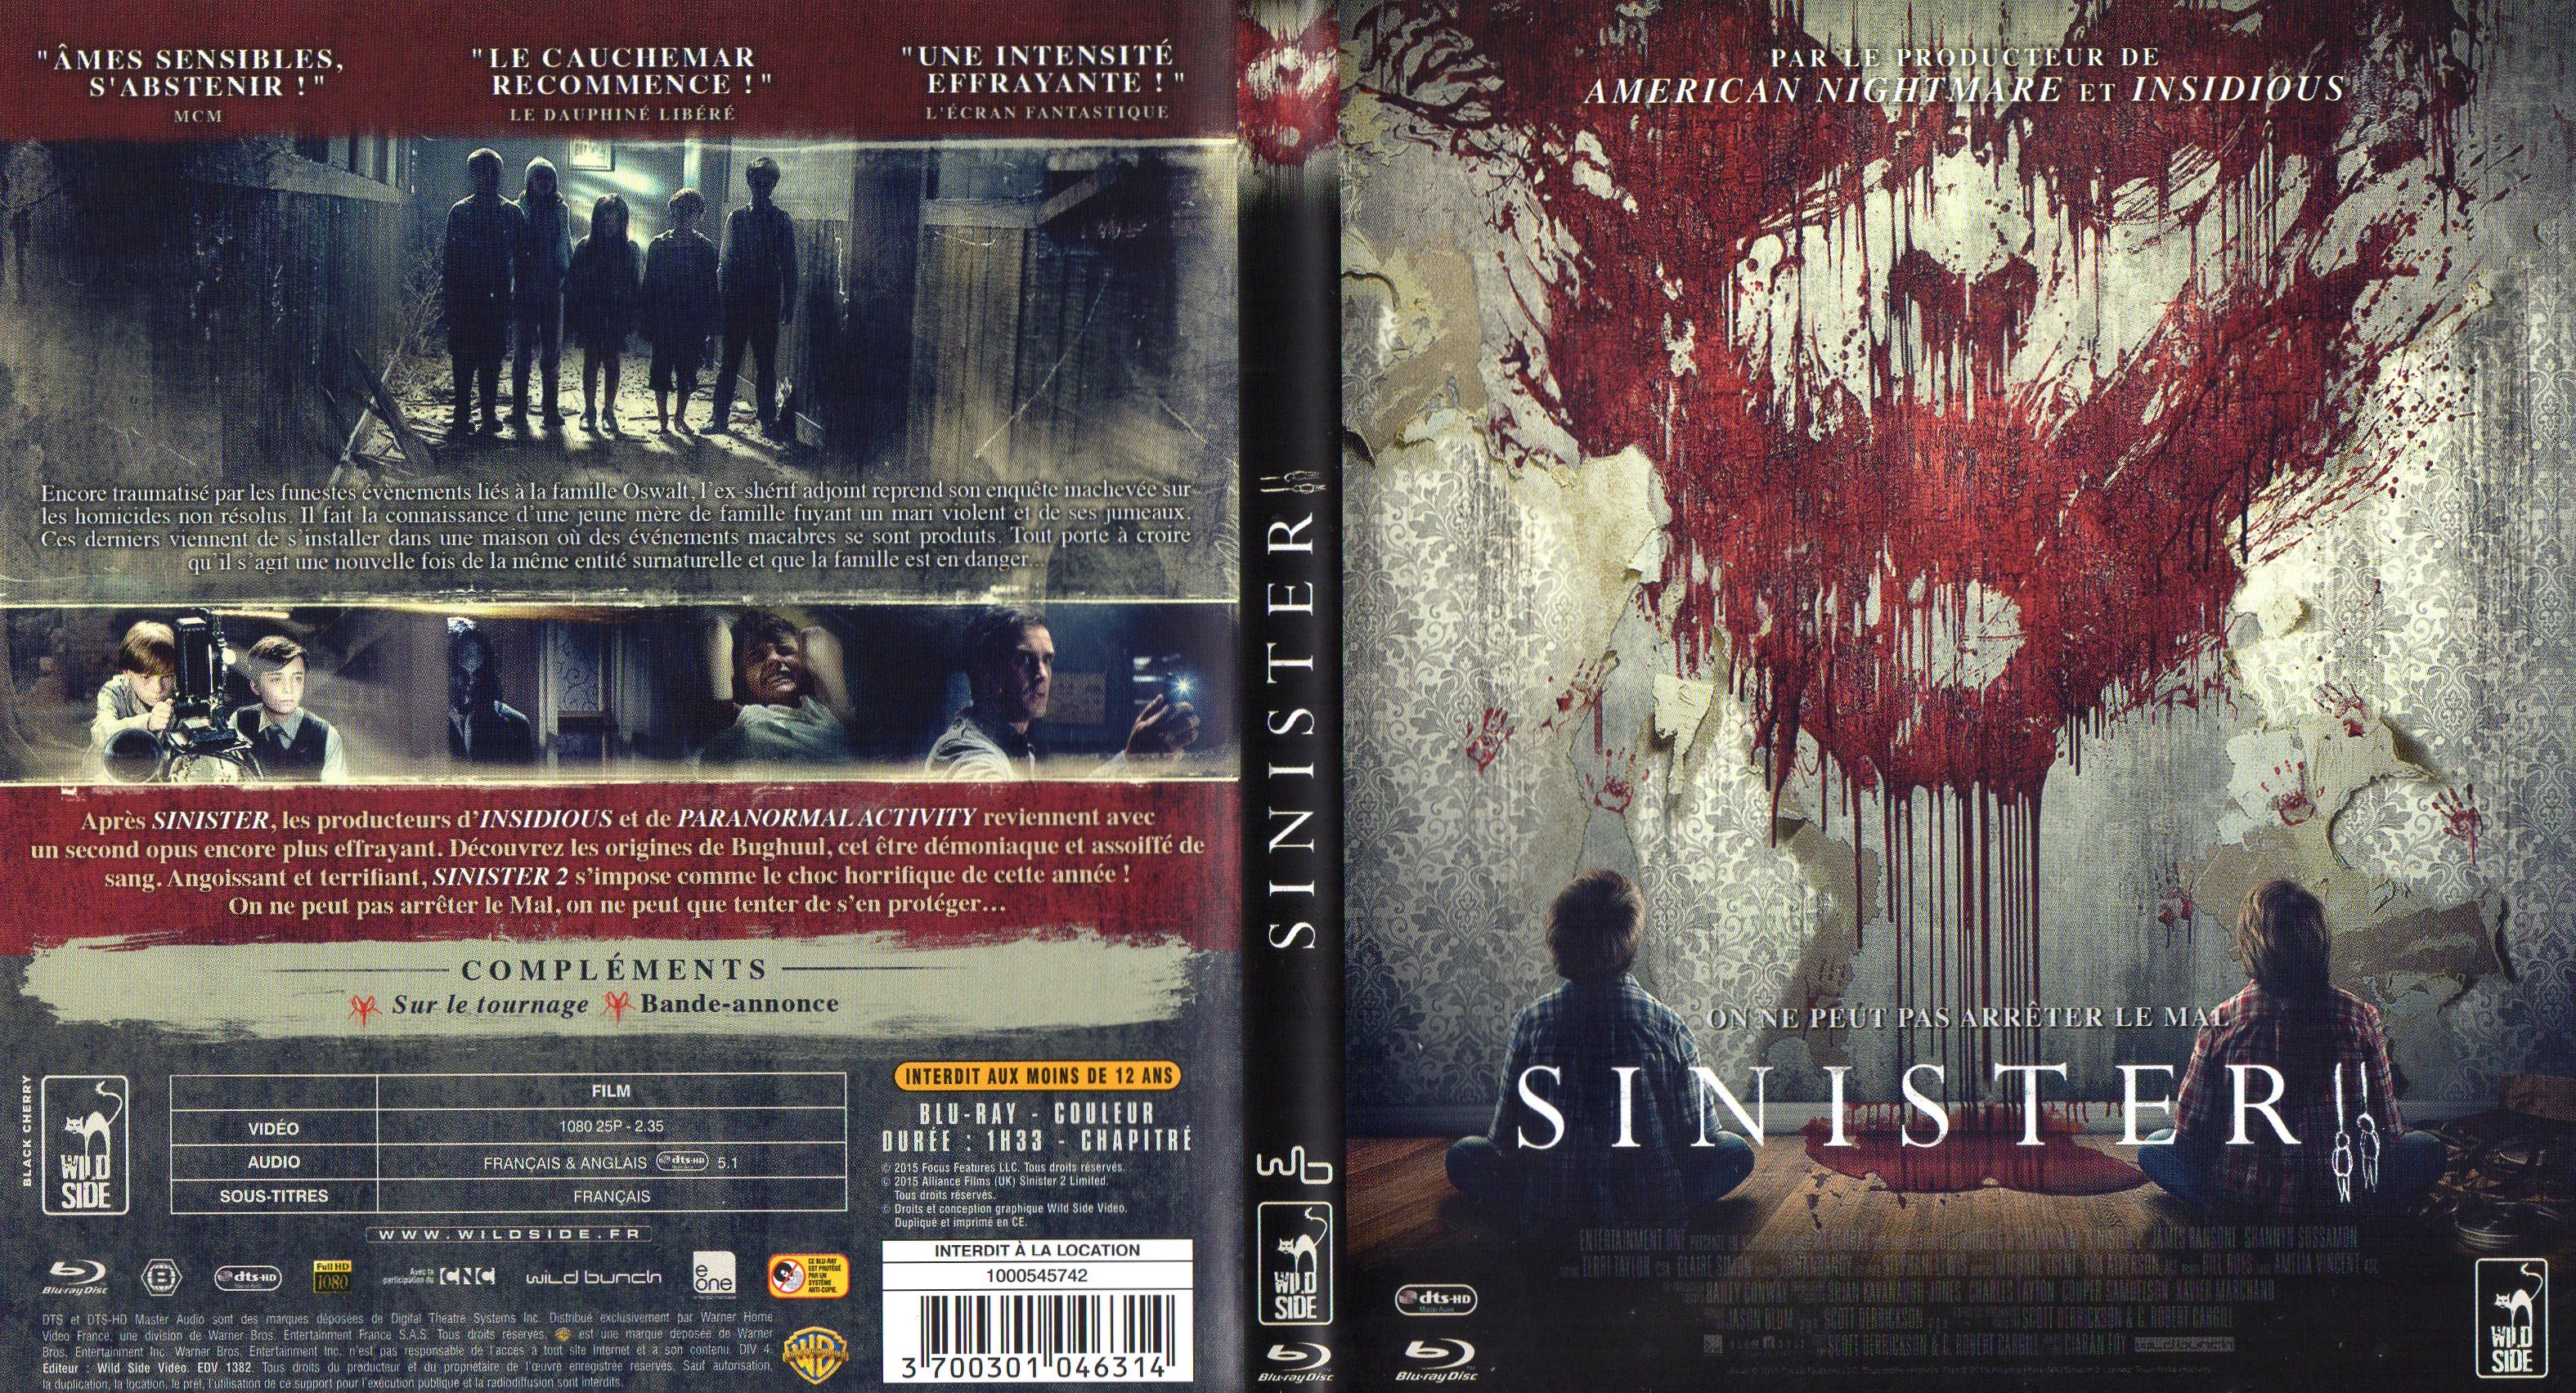 Jaquette DVD Sinister 2 (BLU-RAY)